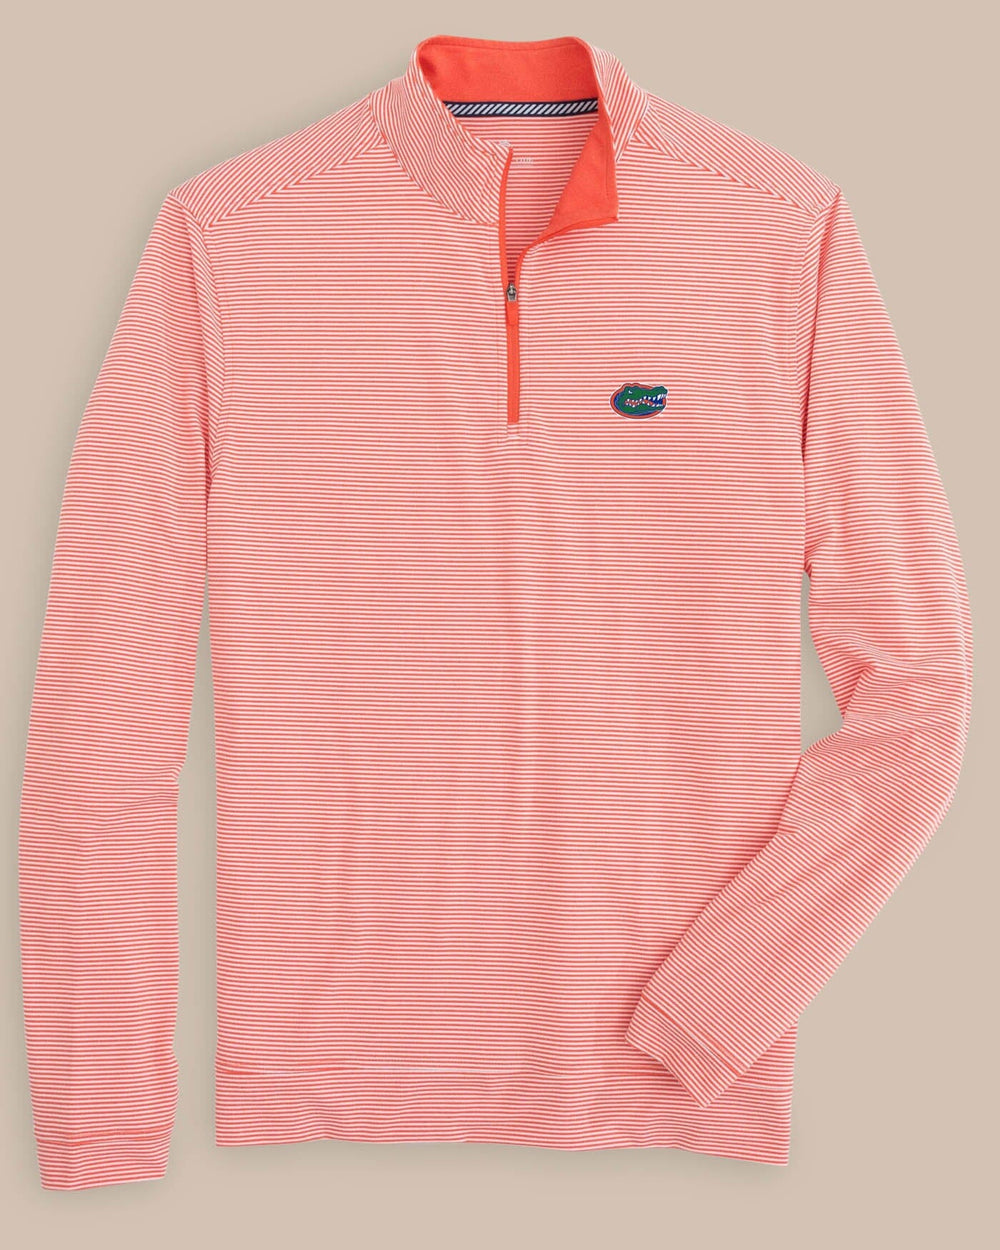 The front view of the Florida Gators Cruiser Micro-Stripe Heather Quarter Zip by Southern Tide - Heather Endzone Orange